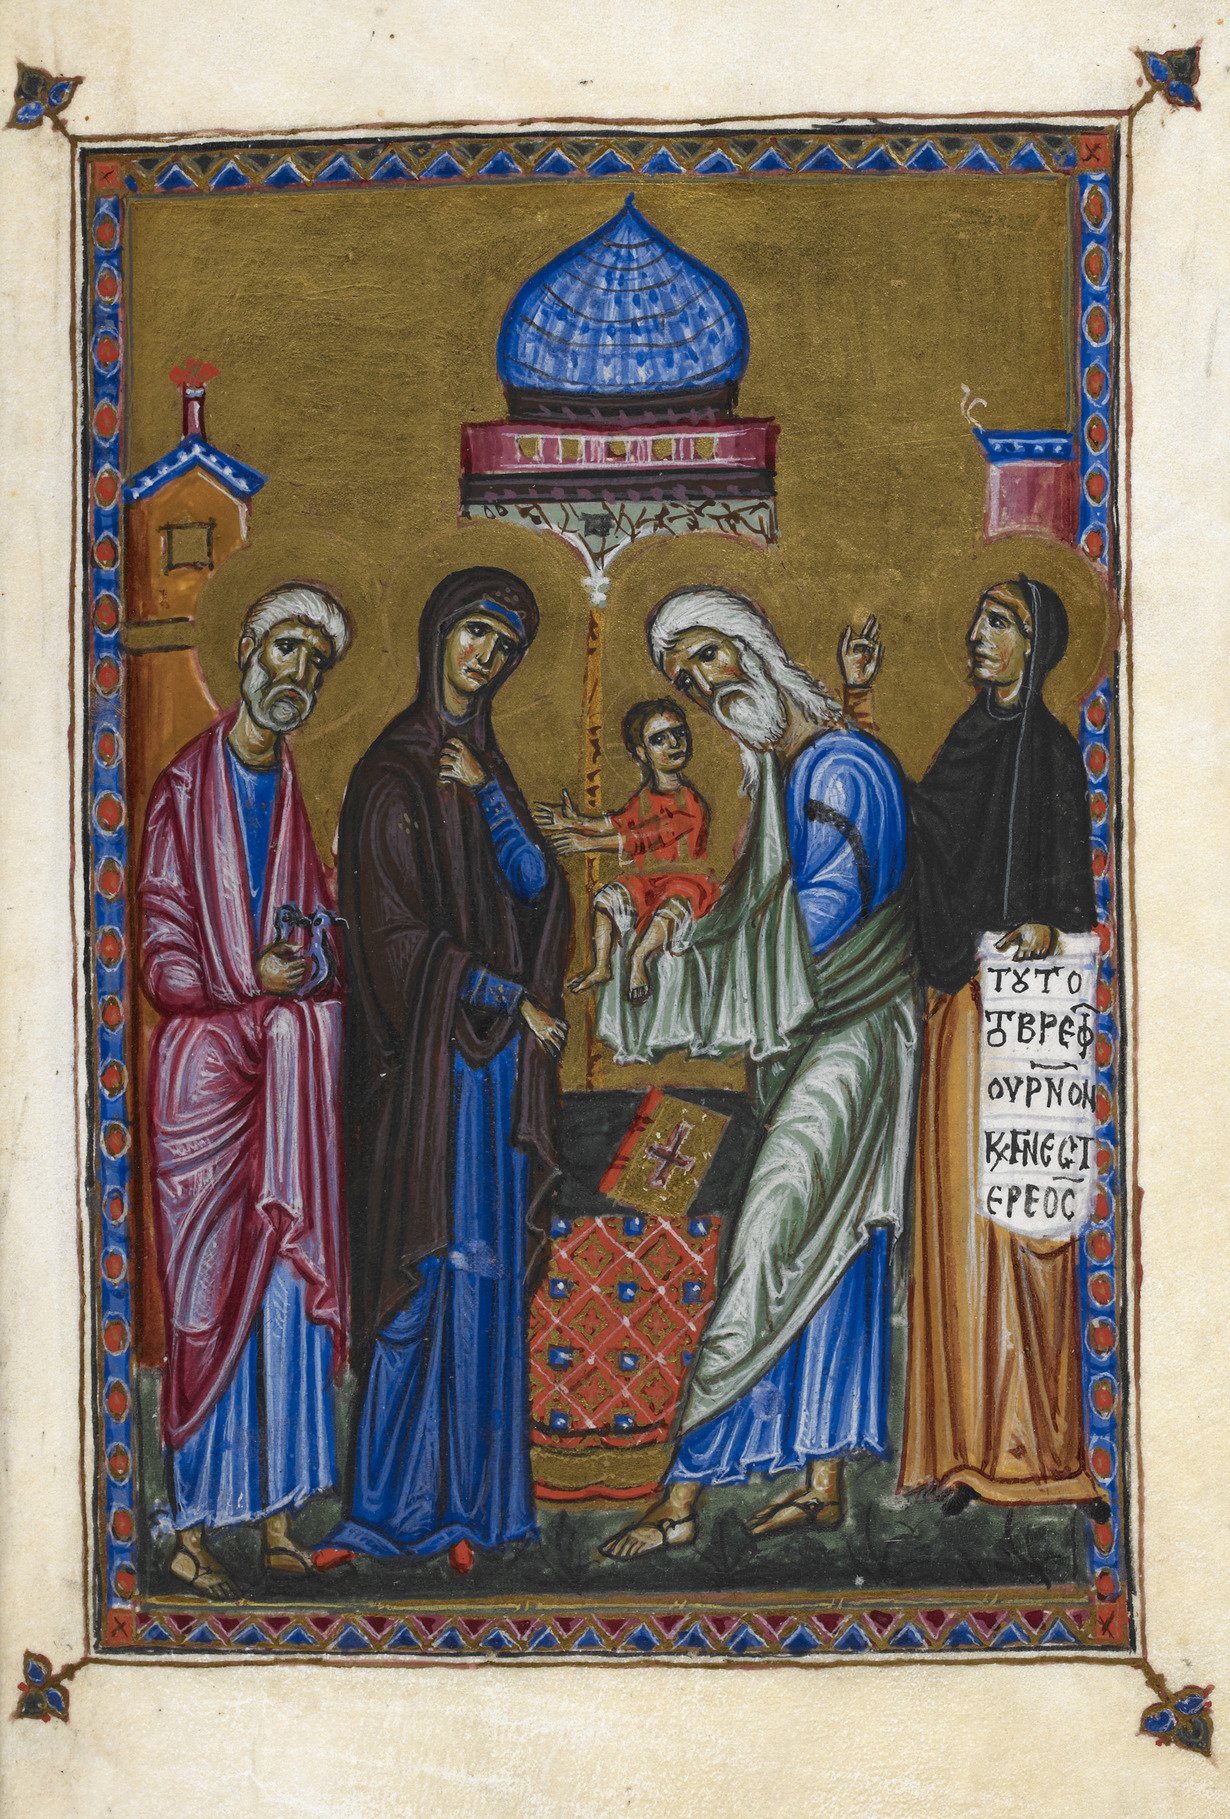 A page from Melisende's very fancy psalter, or prayer book.